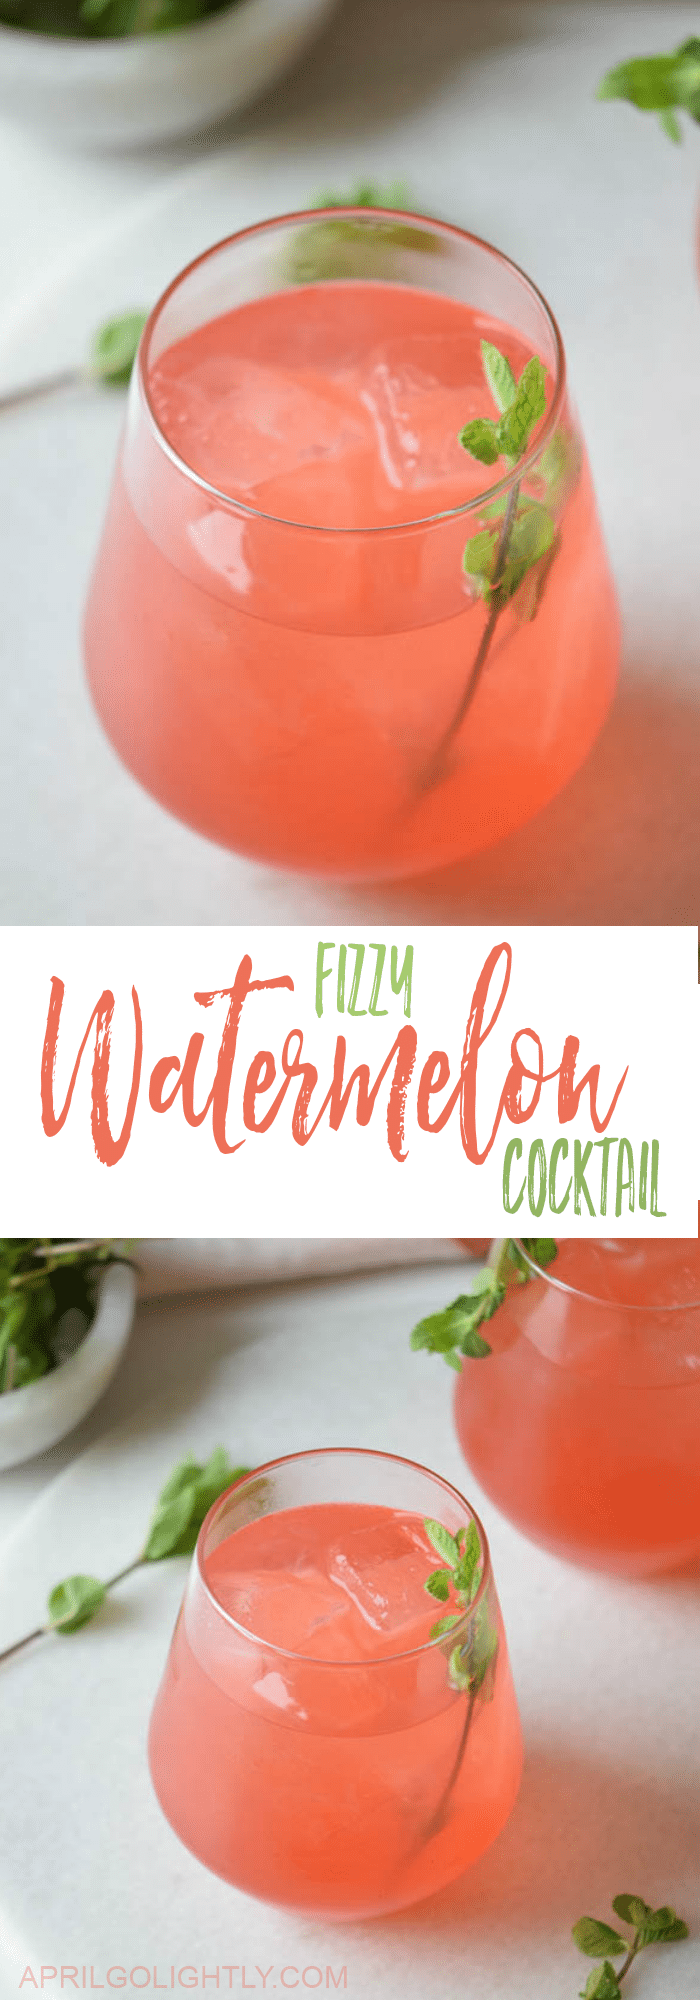 Summer Watermelon Beer Cocktail Recipes - light bubbly fizzy beertails 